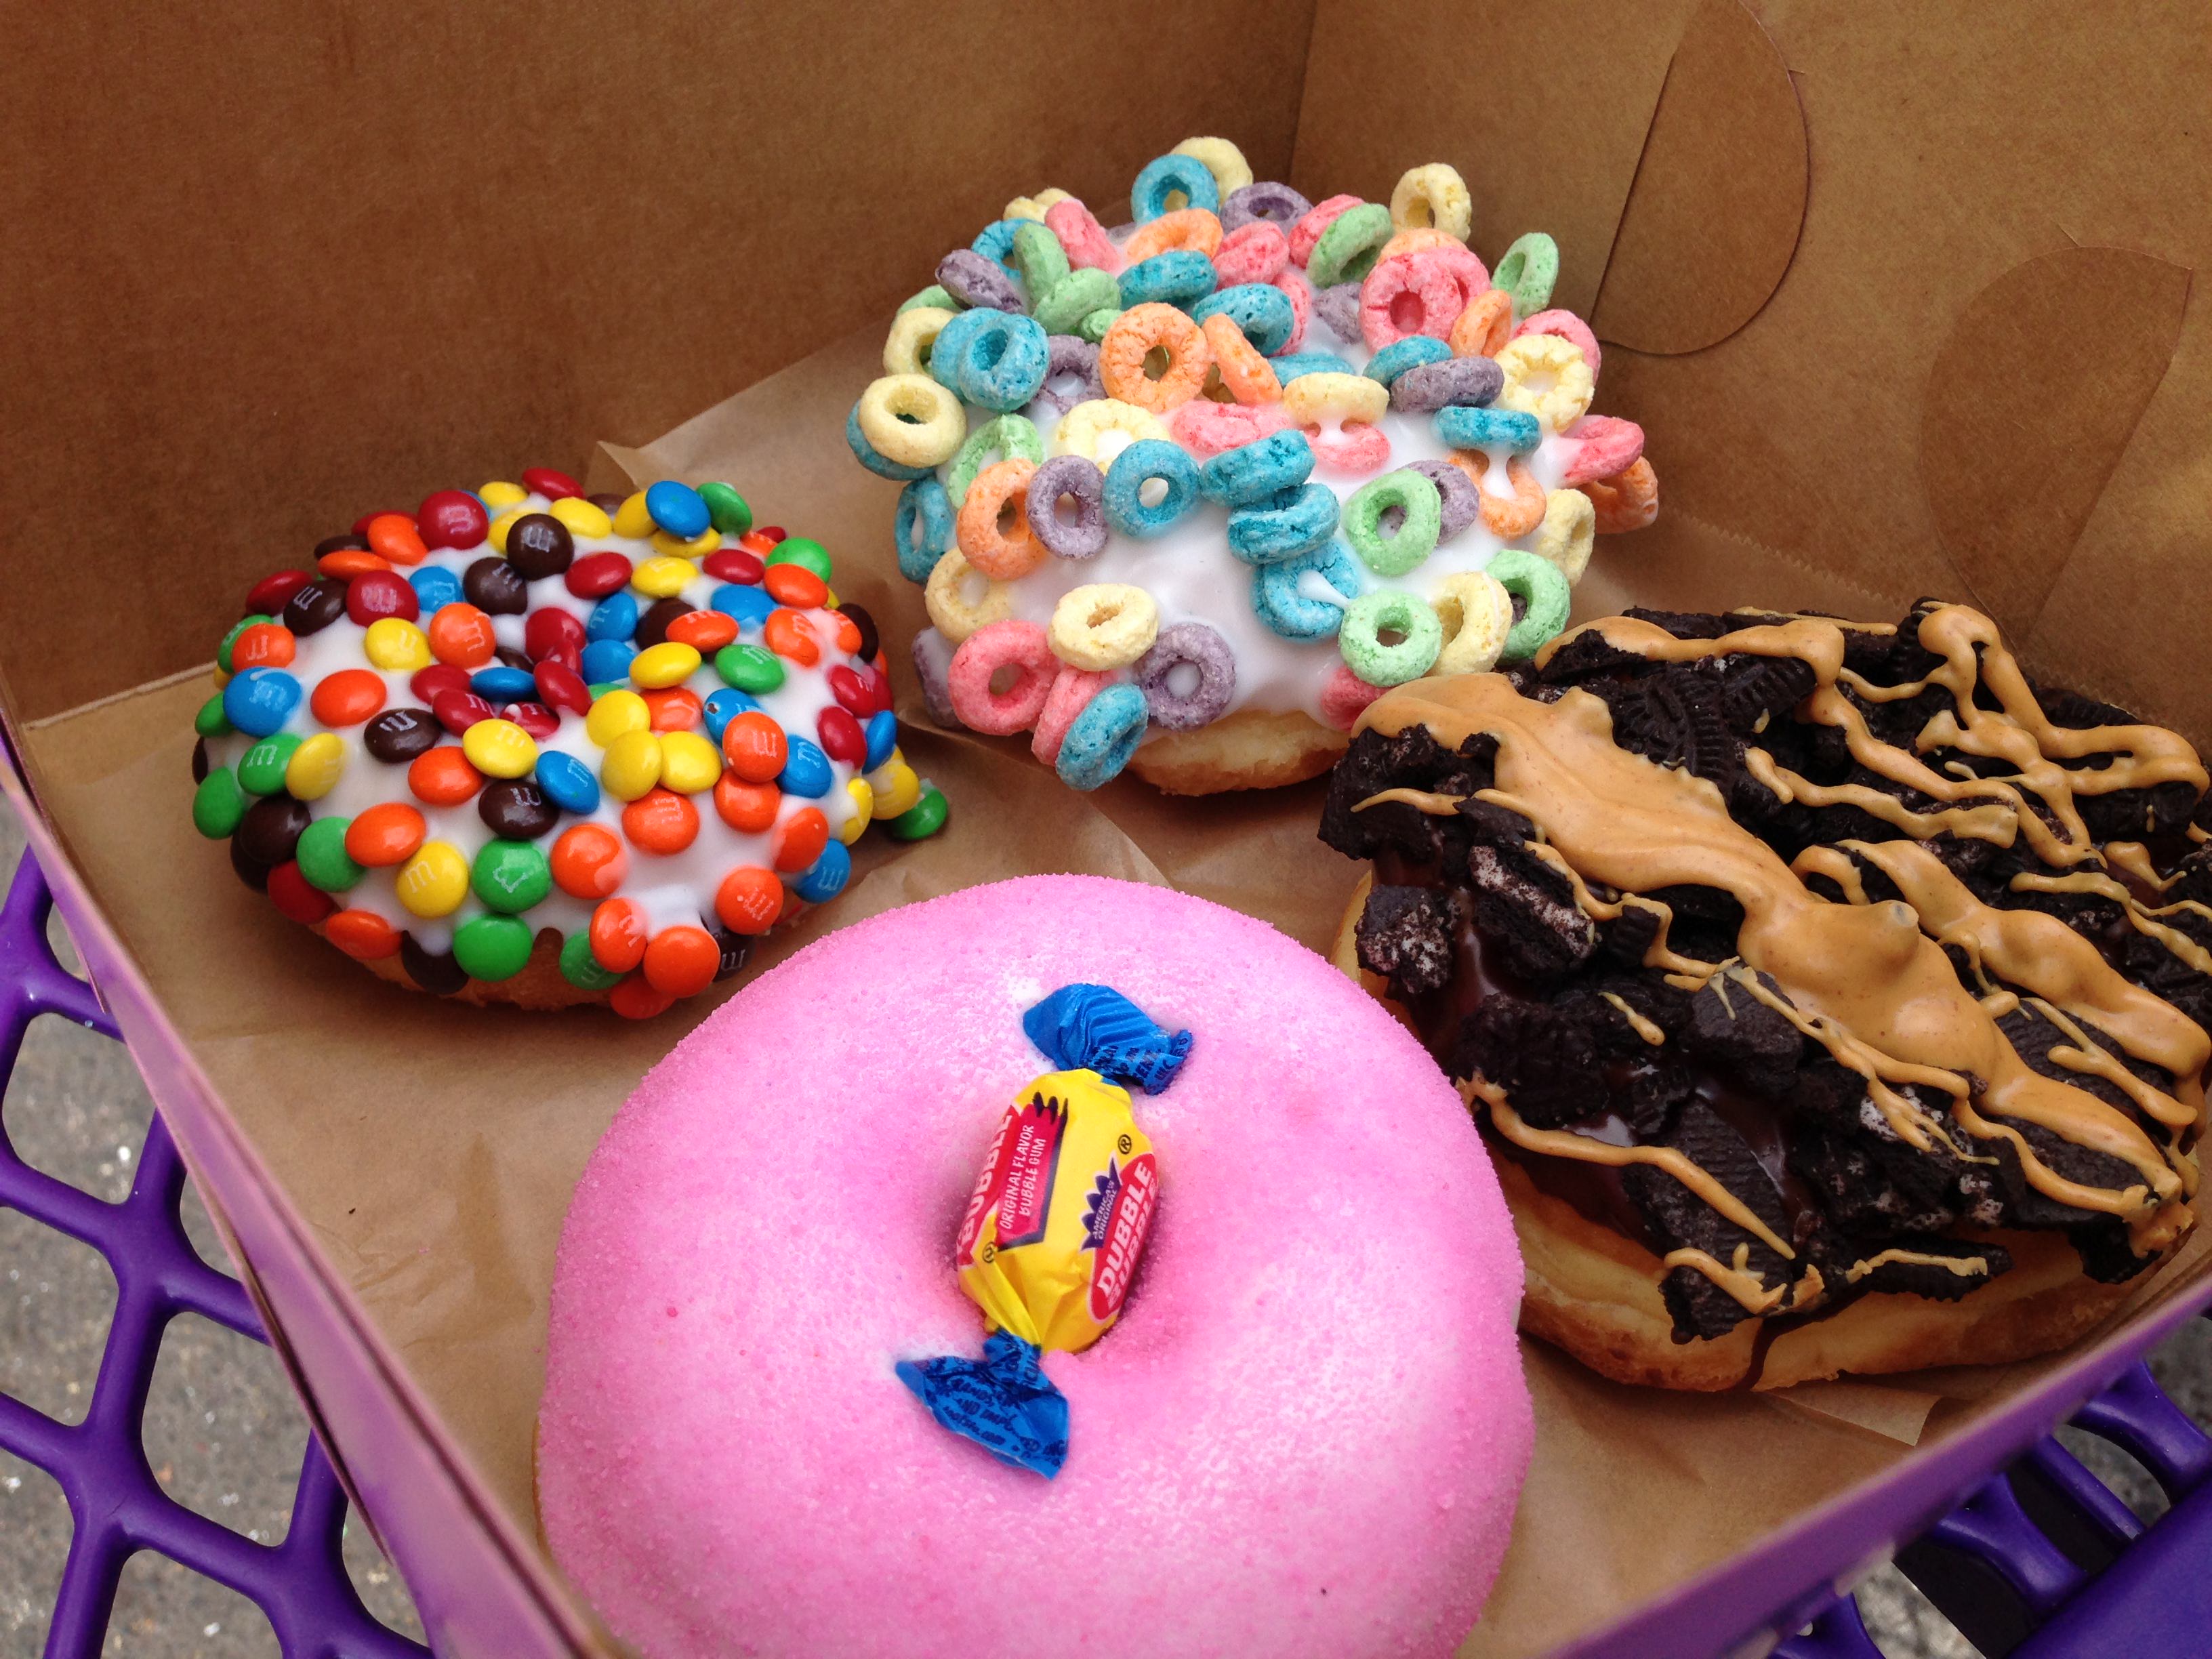 Voodoo Doughnut: “The Magic is in the Hole.”